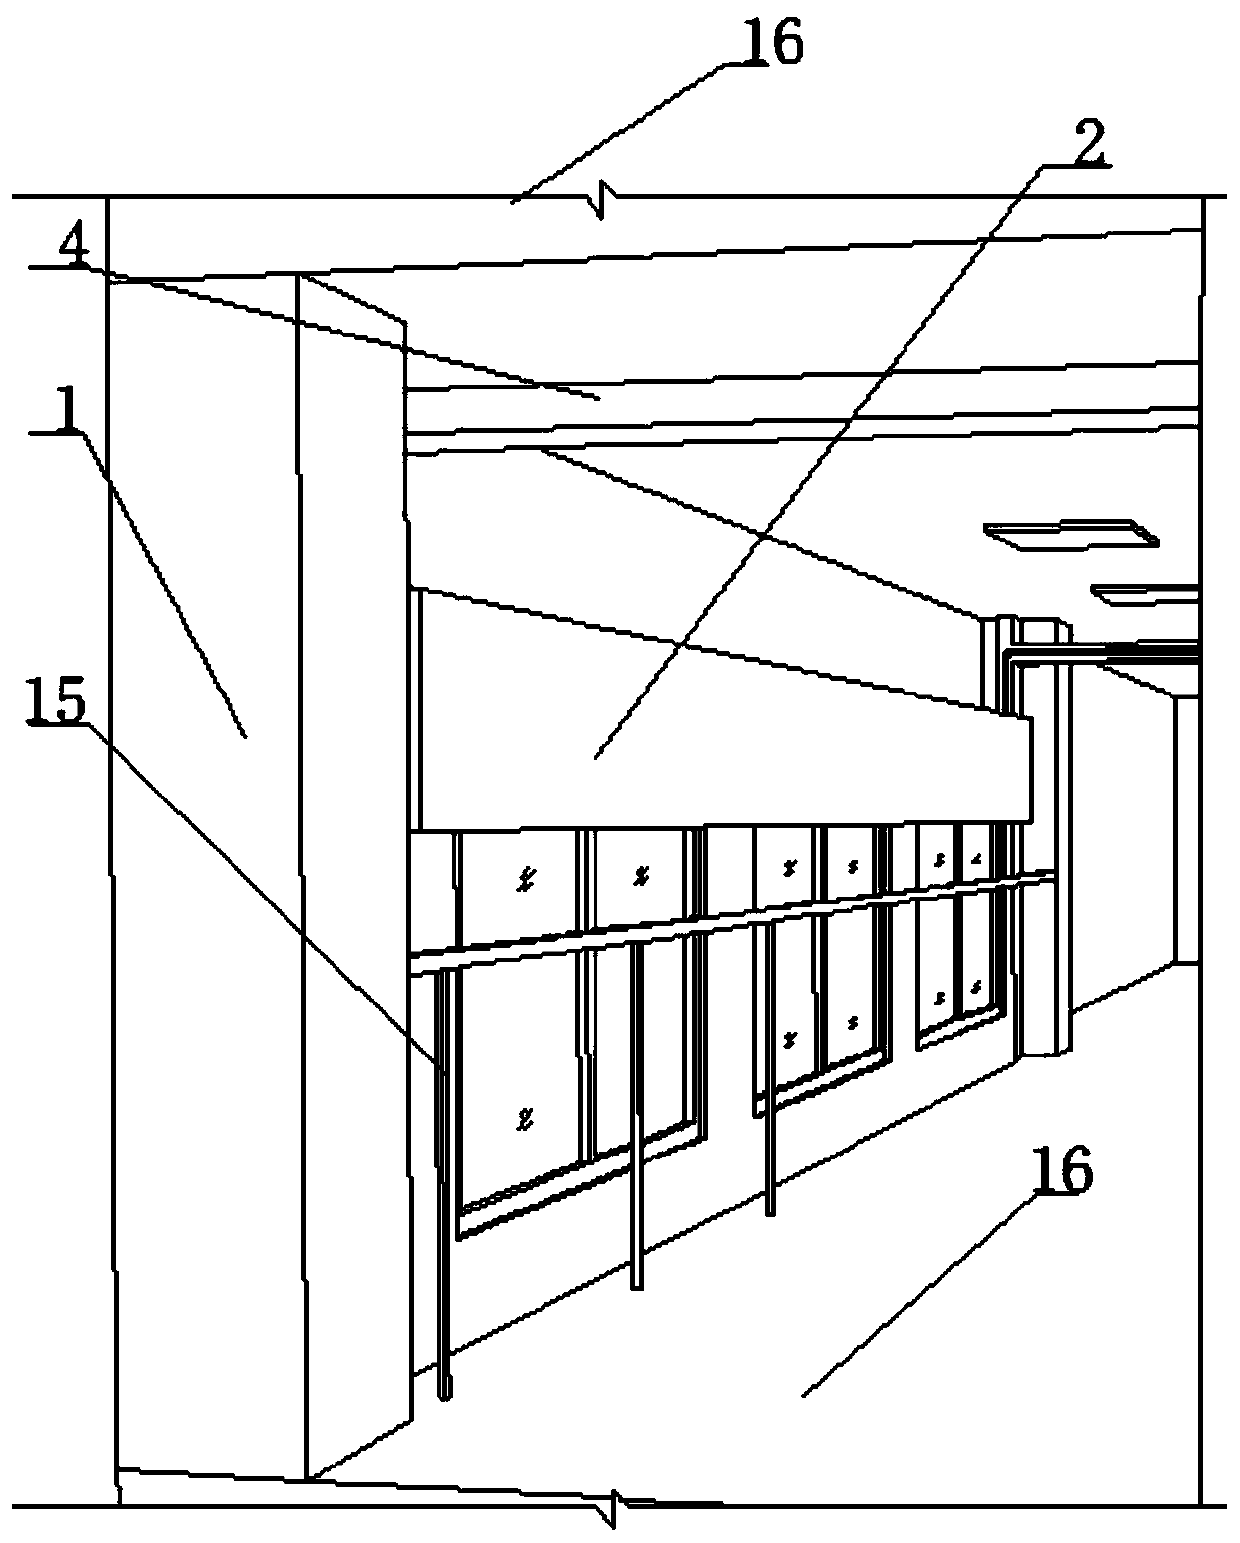 A storage and movable combination device for verandah window and wall